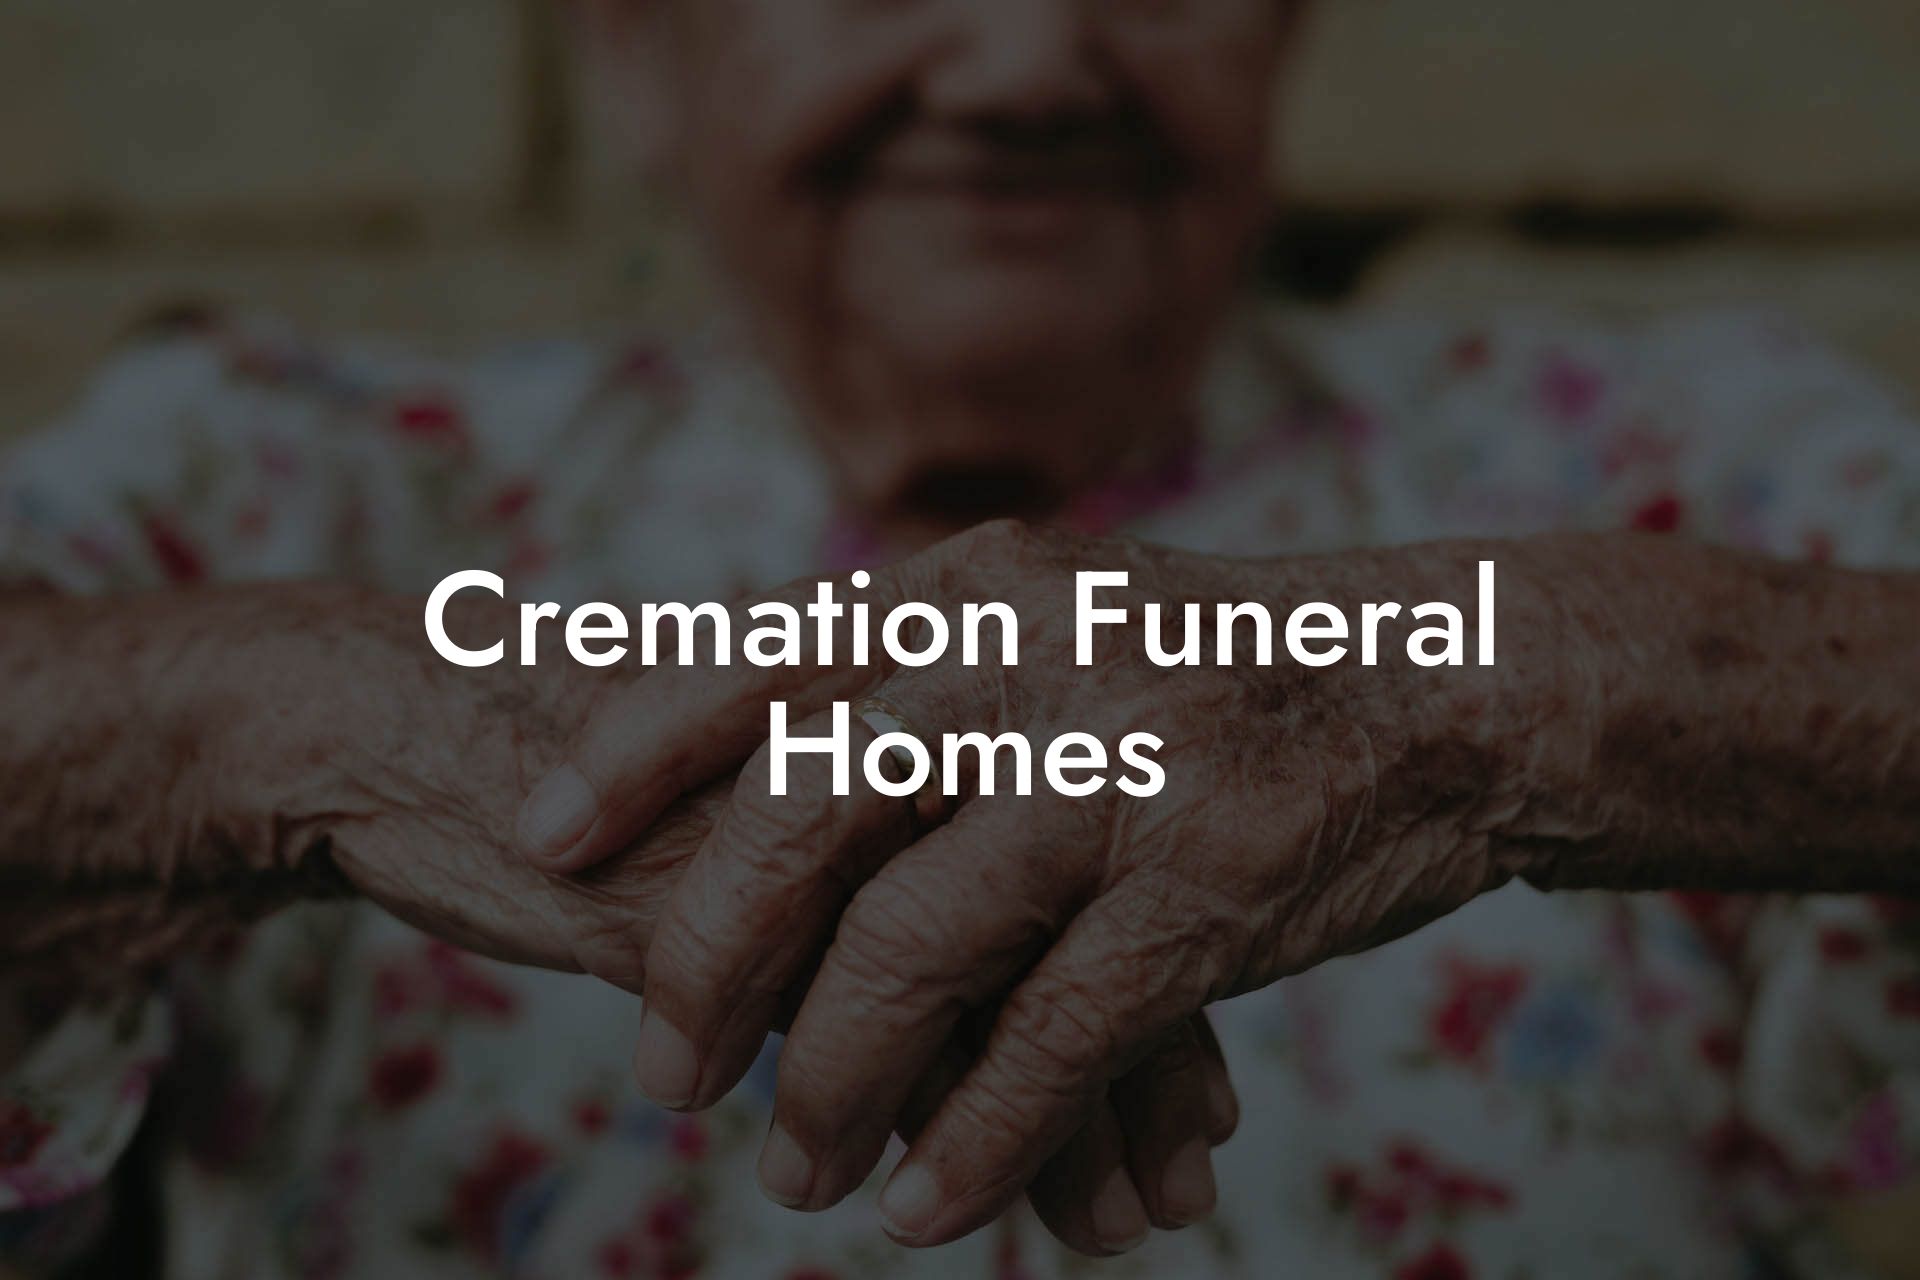 Cremation Funeral Homes